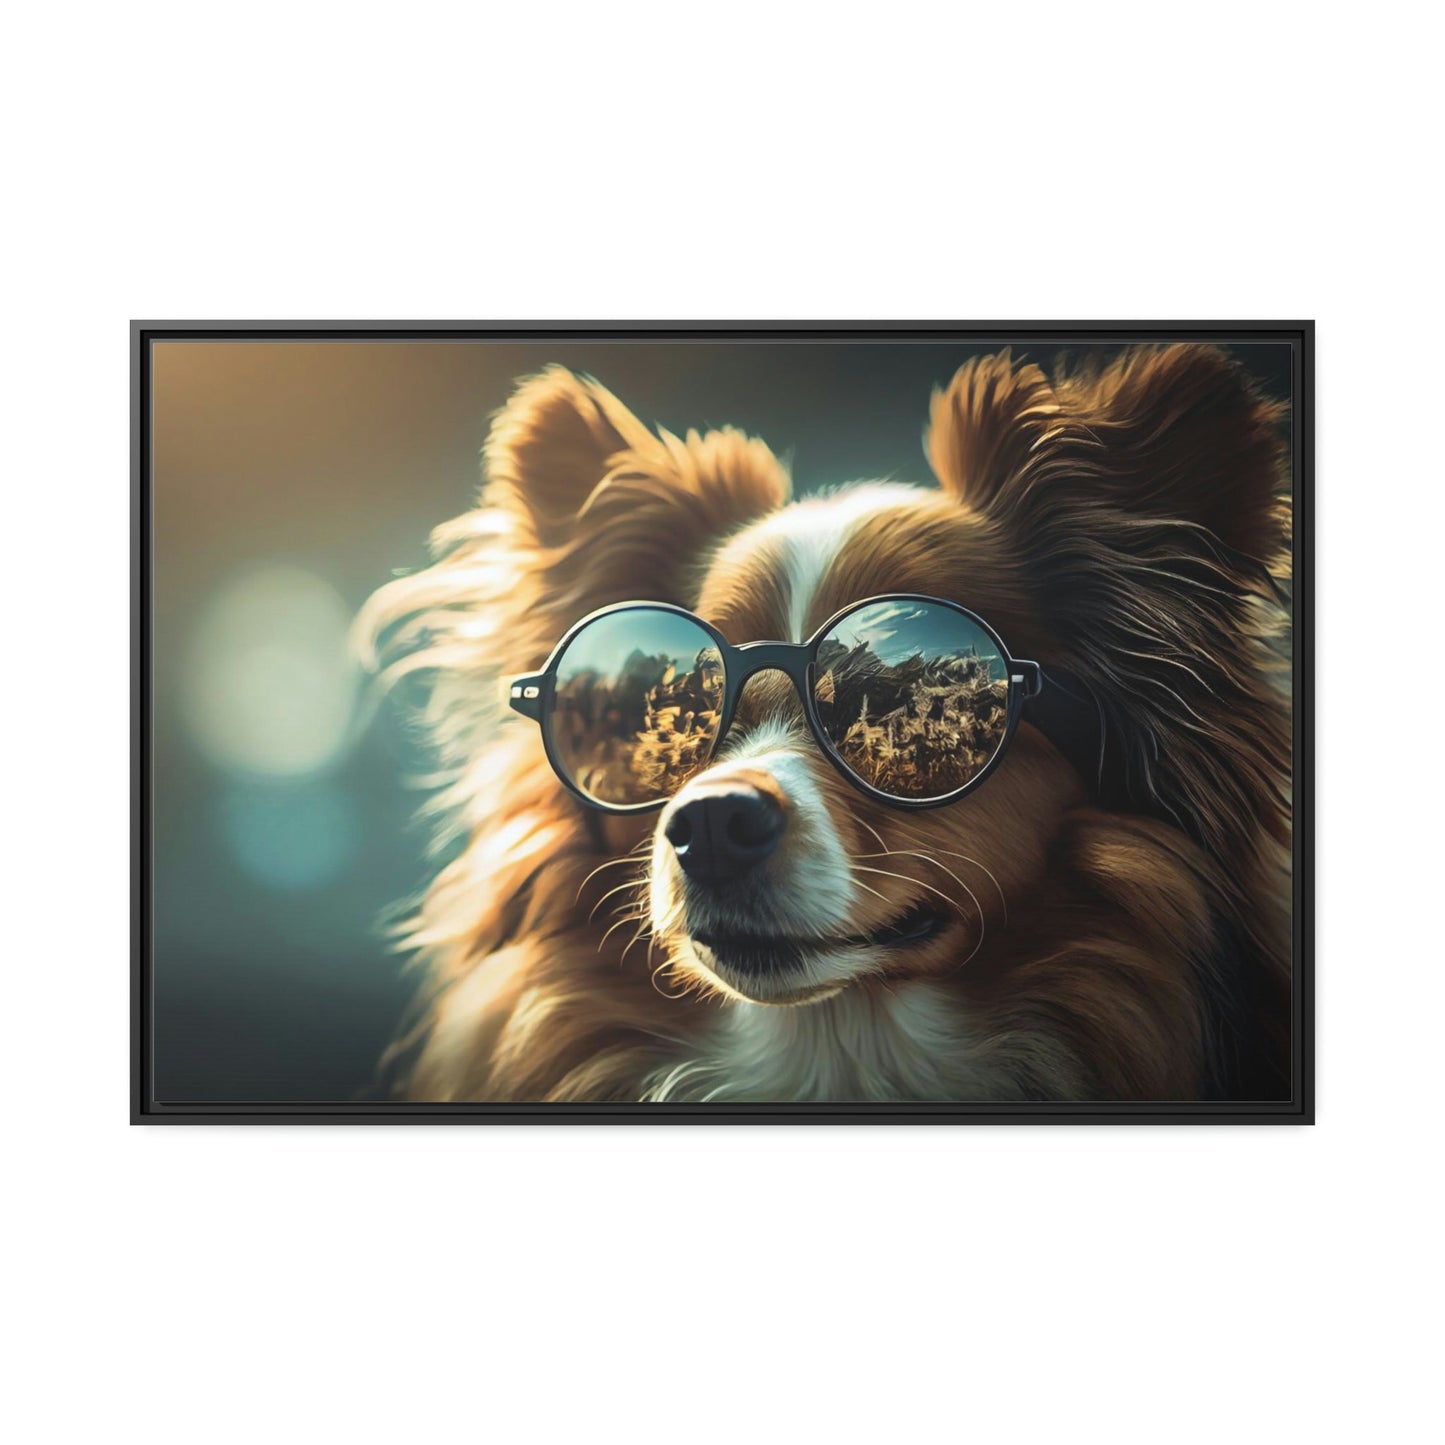 Canine Curiosity: Natural Canvas Wall Art of Dogs Exploring the World